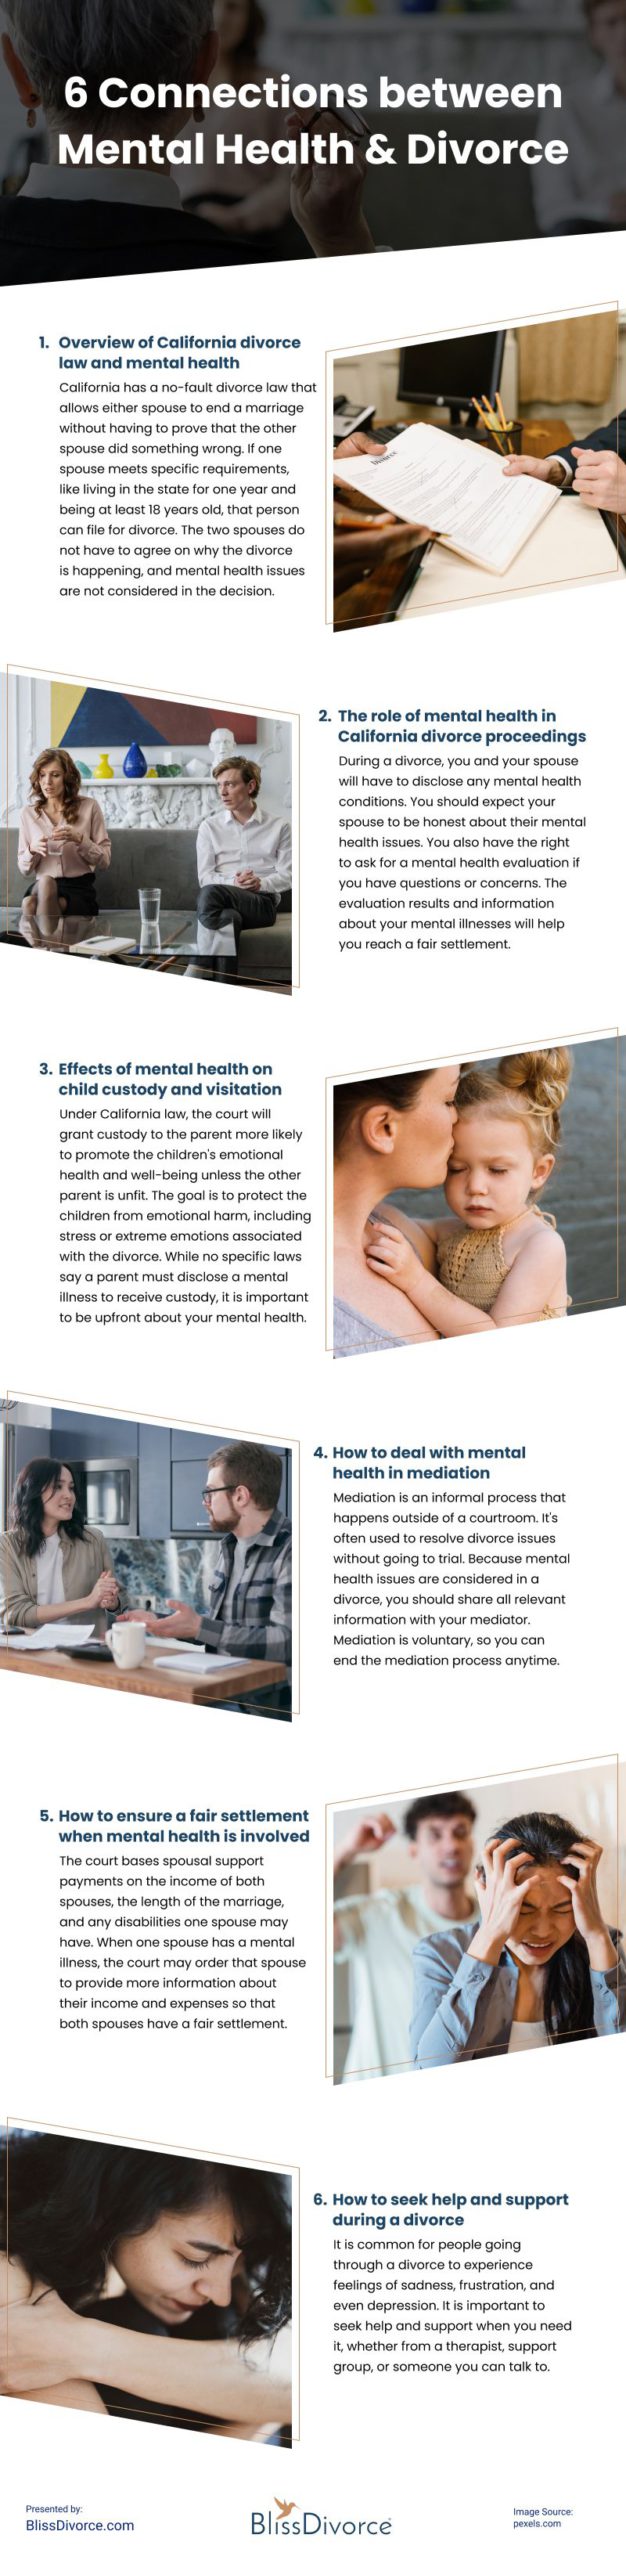 6 Connections Between Mental Health and Divorce Infographic